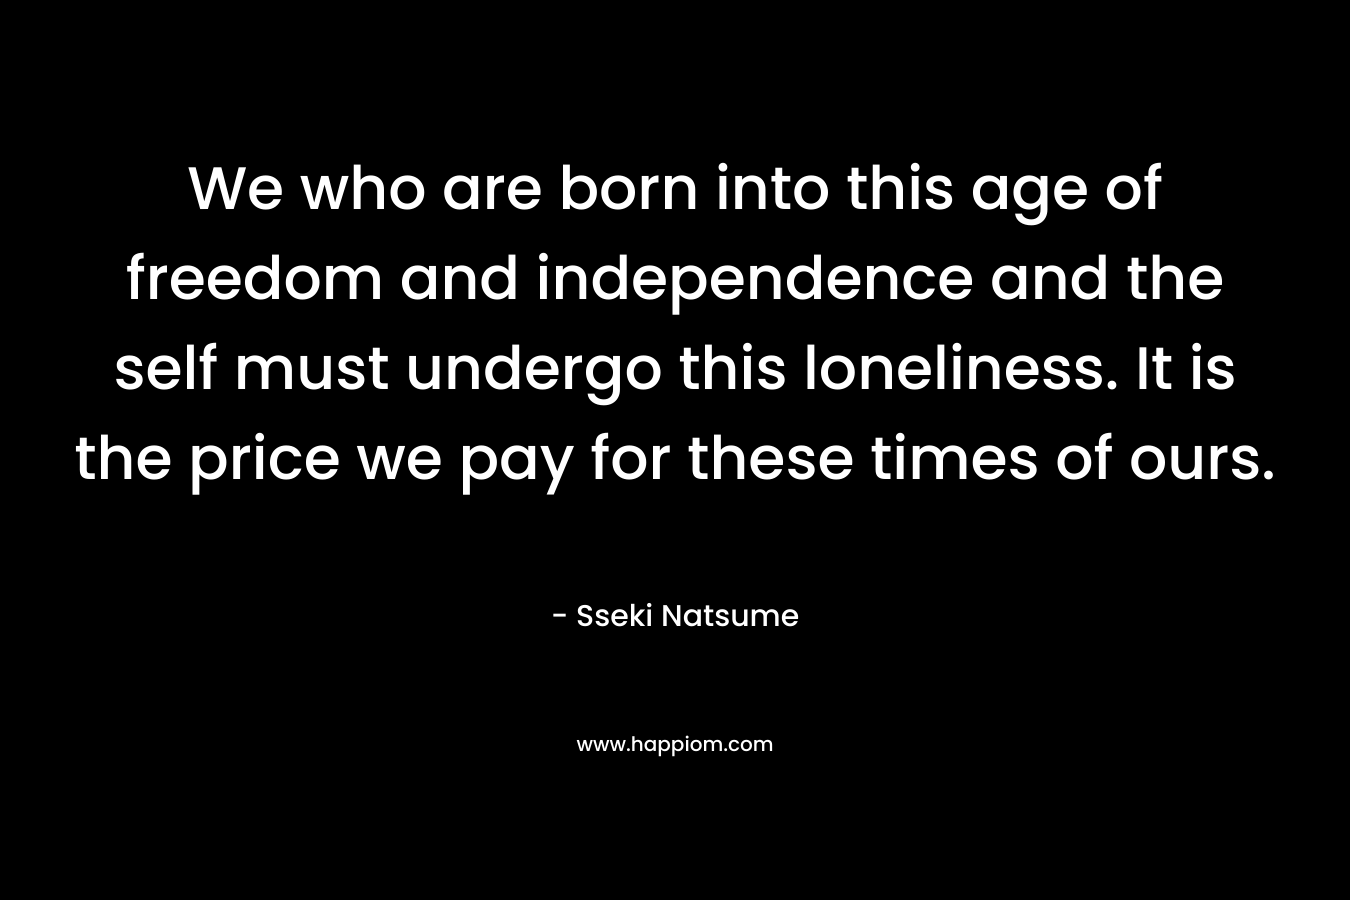 We who are born into this age of freedom and independence and the self must undergo this loneliness. It is the price we pay for these times of ours.